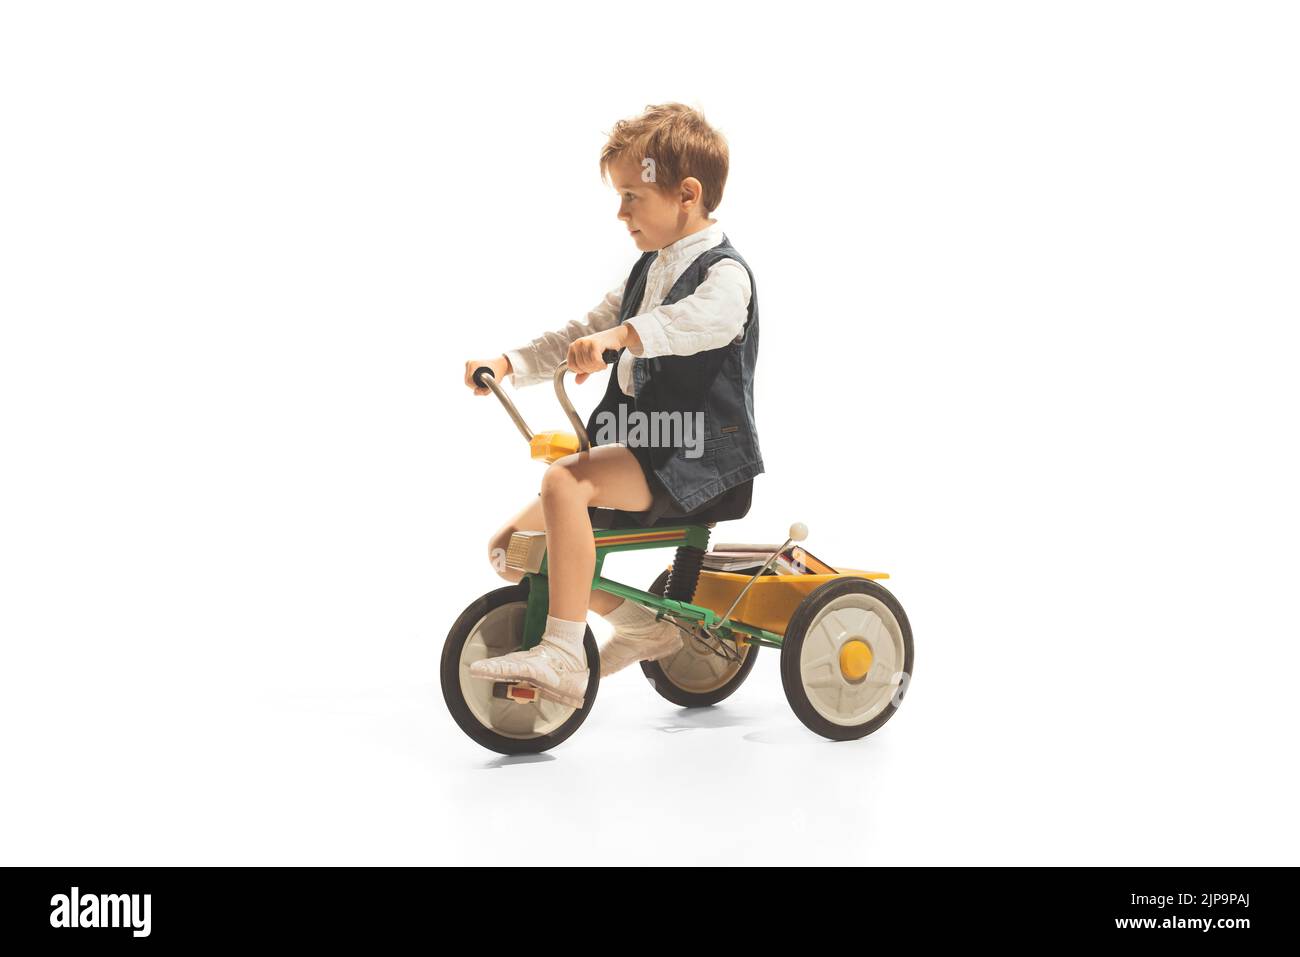 Portrait of child, boy in vintage outfit playing, having fun, riding small bike isolated over white background Stock Photo